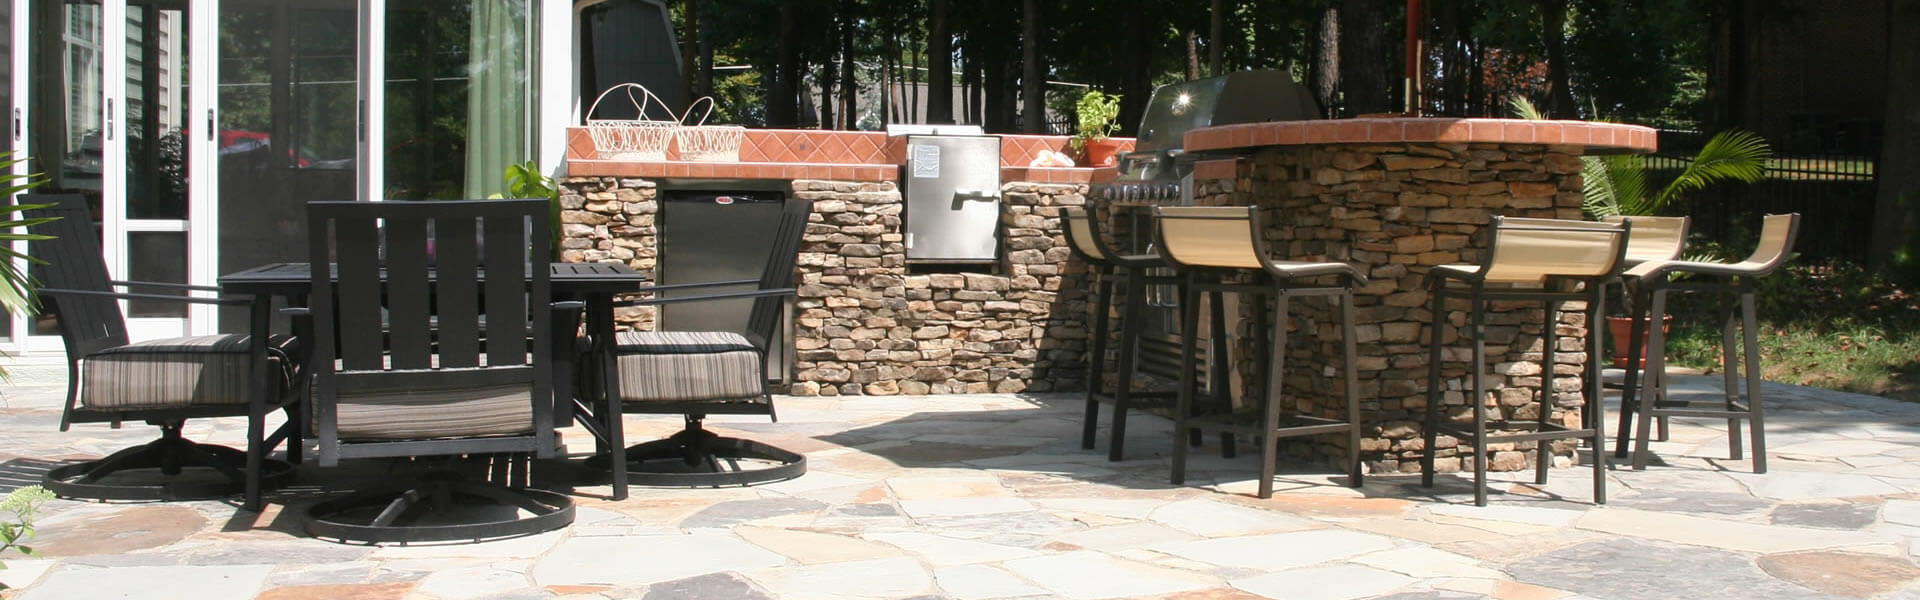 Hardscaping Projects for Outdoor Living | Mooresville, NC